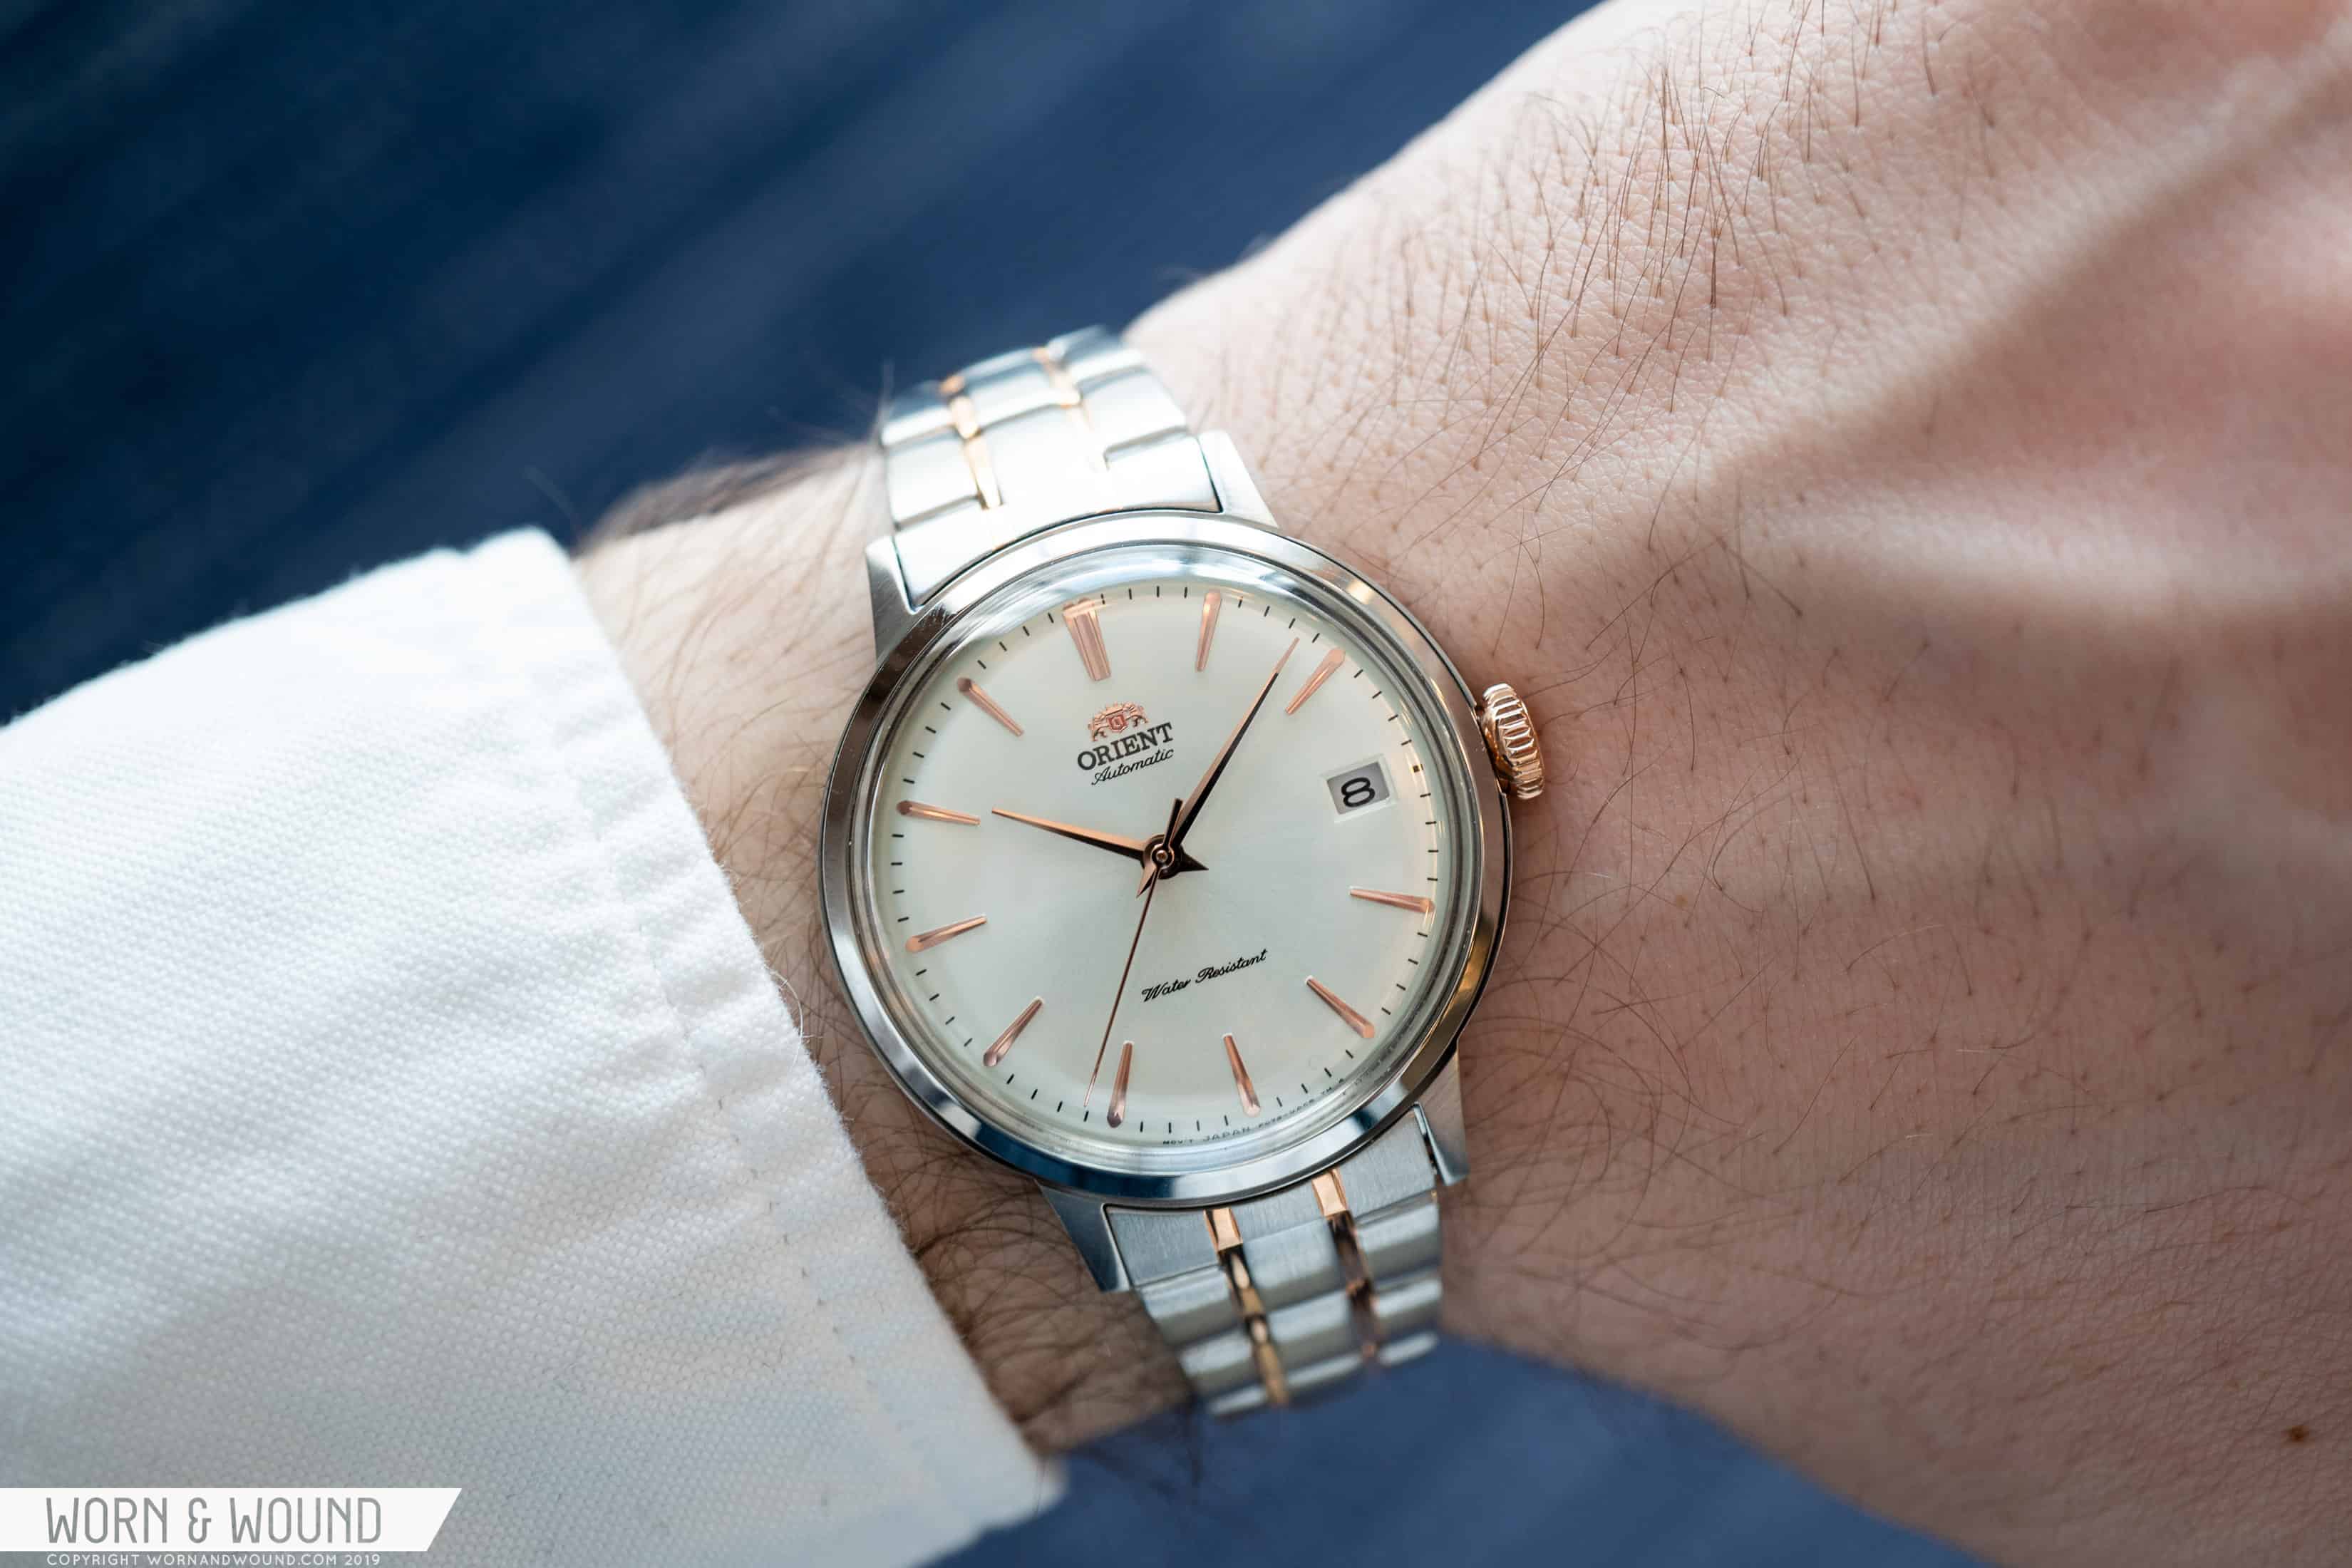 Baselworld 2019: First Look at the New 36mm Classic Date 